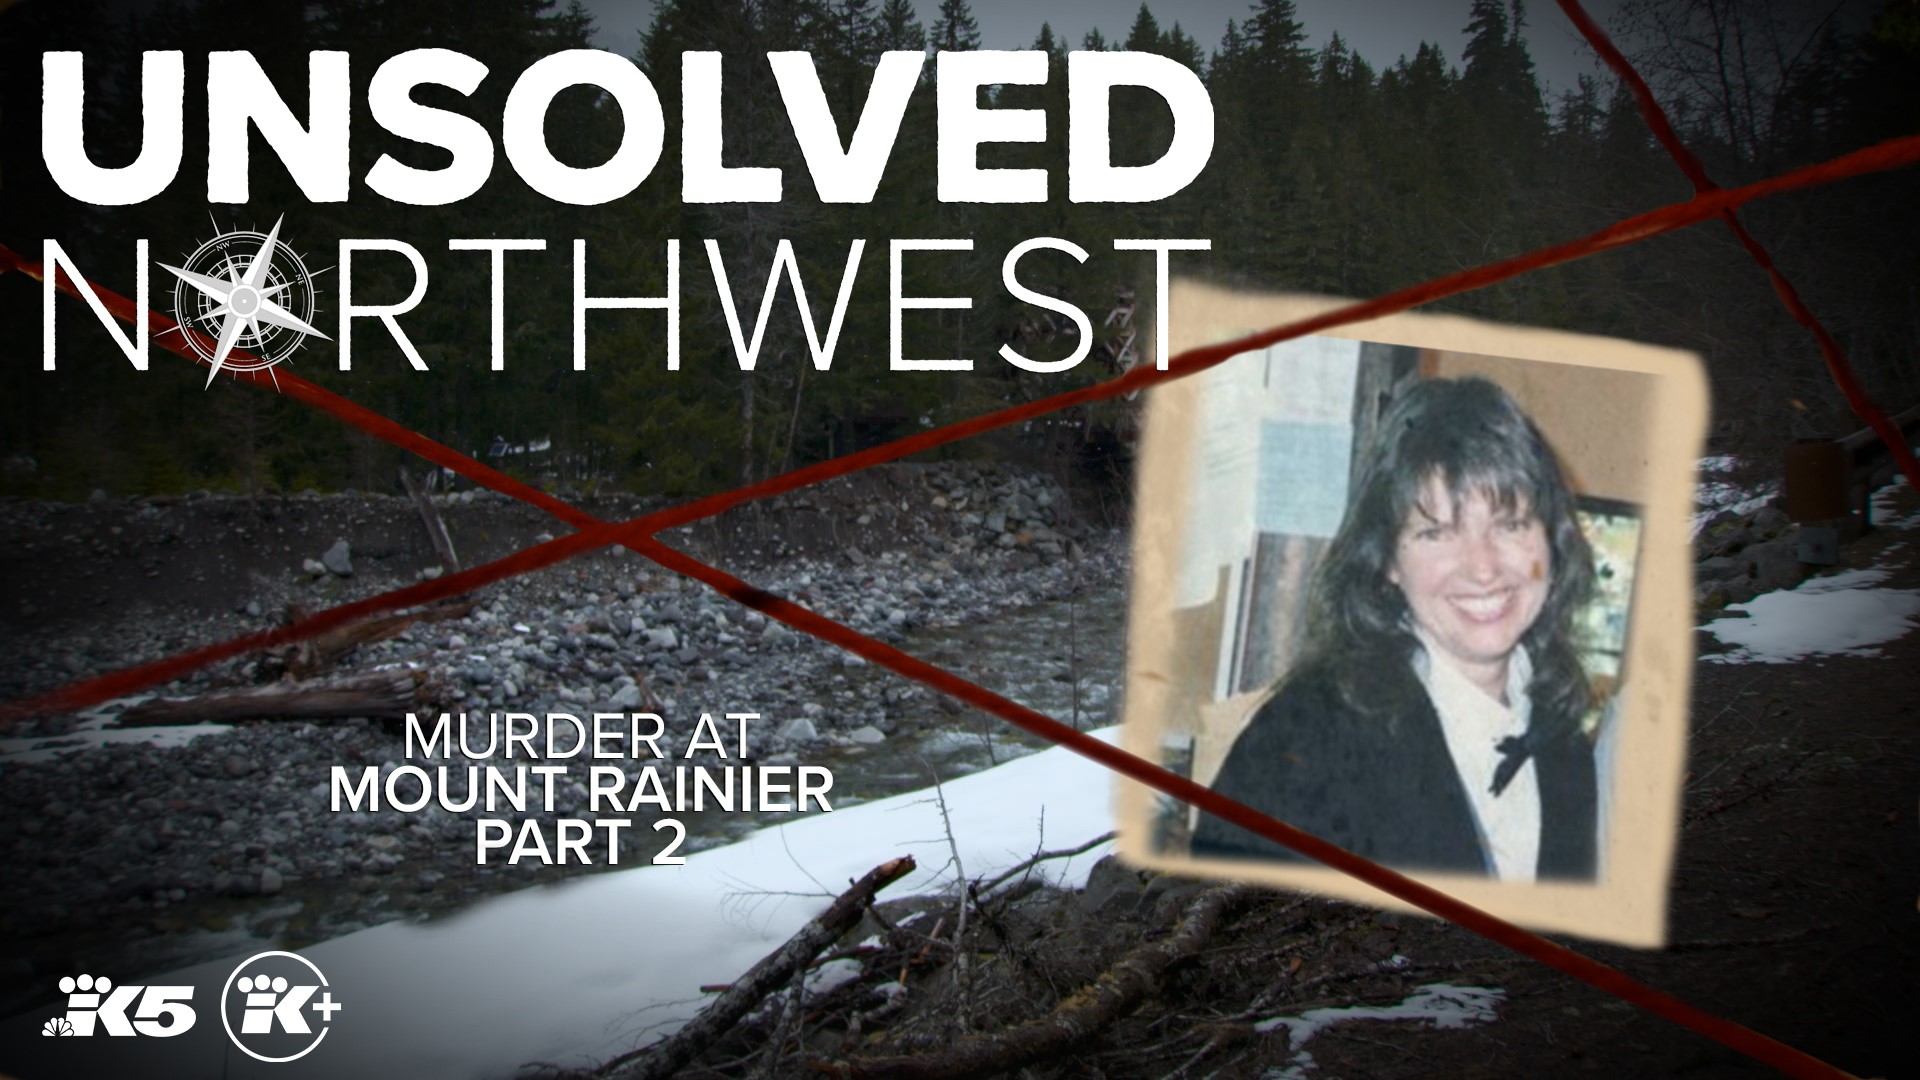 Sheila Kearns loved her job at Mount Rainier National Park. In 1996, she went missing and seven months later, her scattered remains were found in the park.